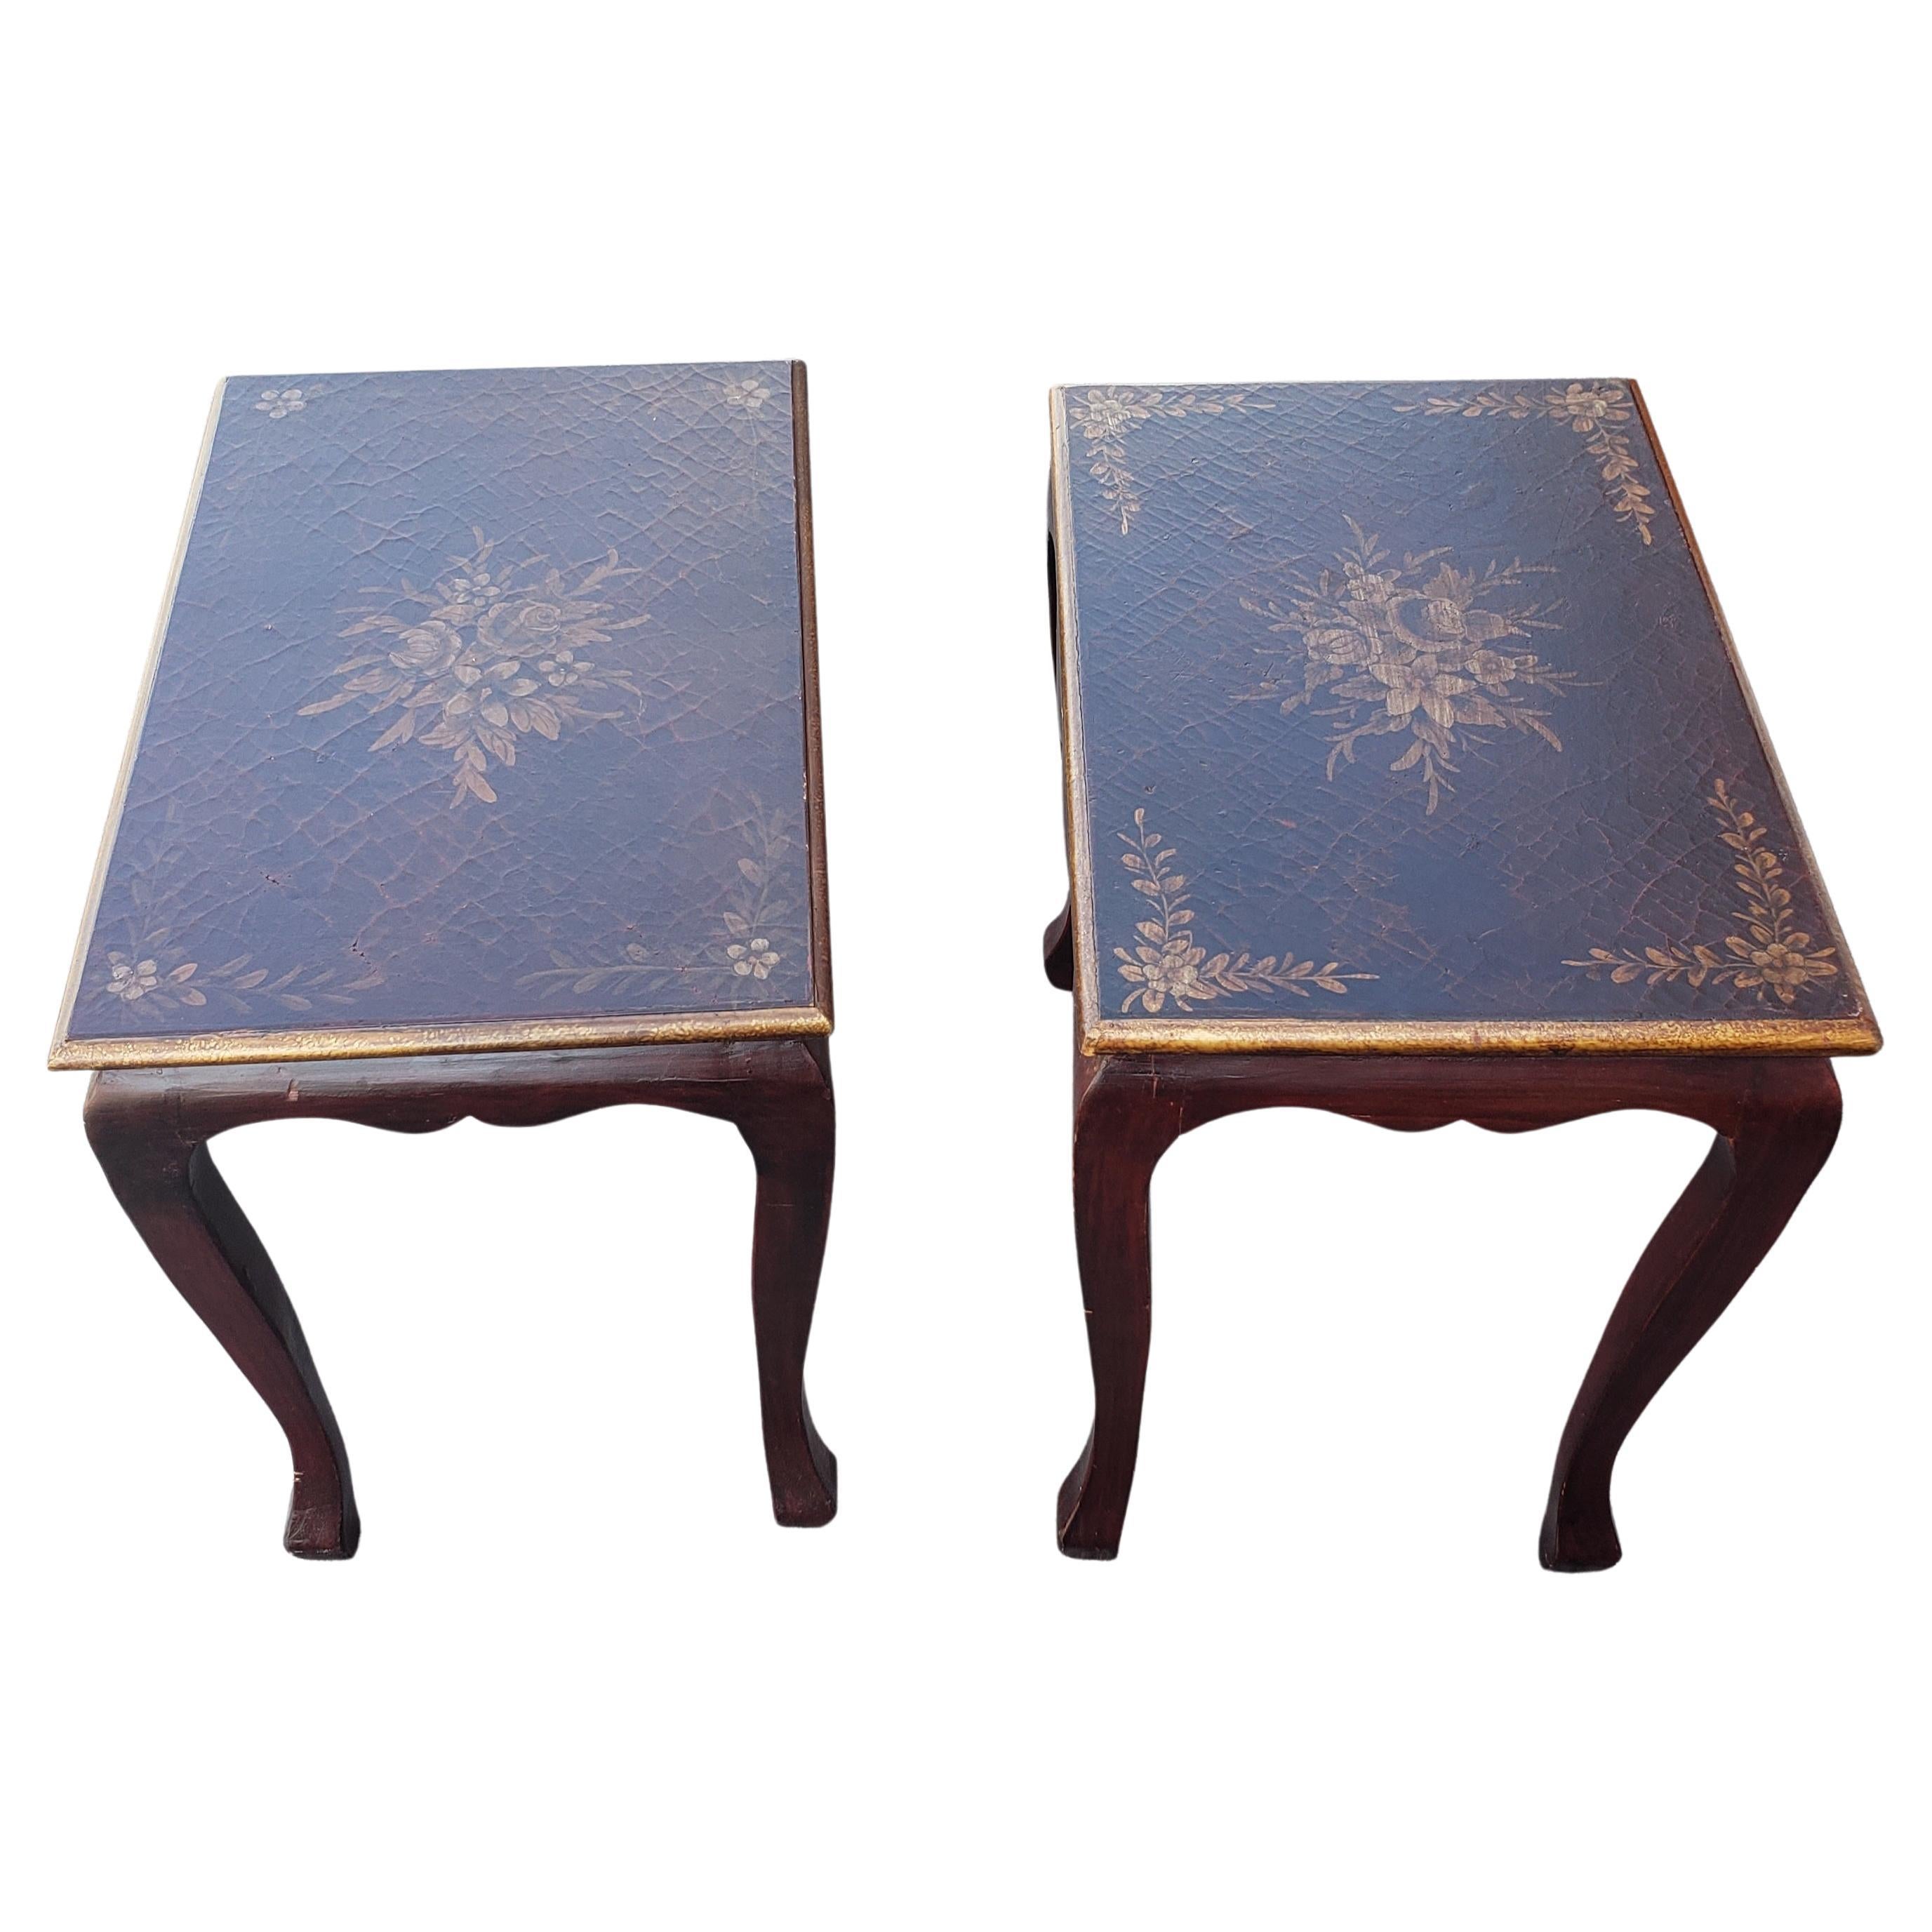 Pair of parcel-gilt, crackled, Hand-painted side tables in good vintage condition. Beautiful flower theme painting. Measure.
 